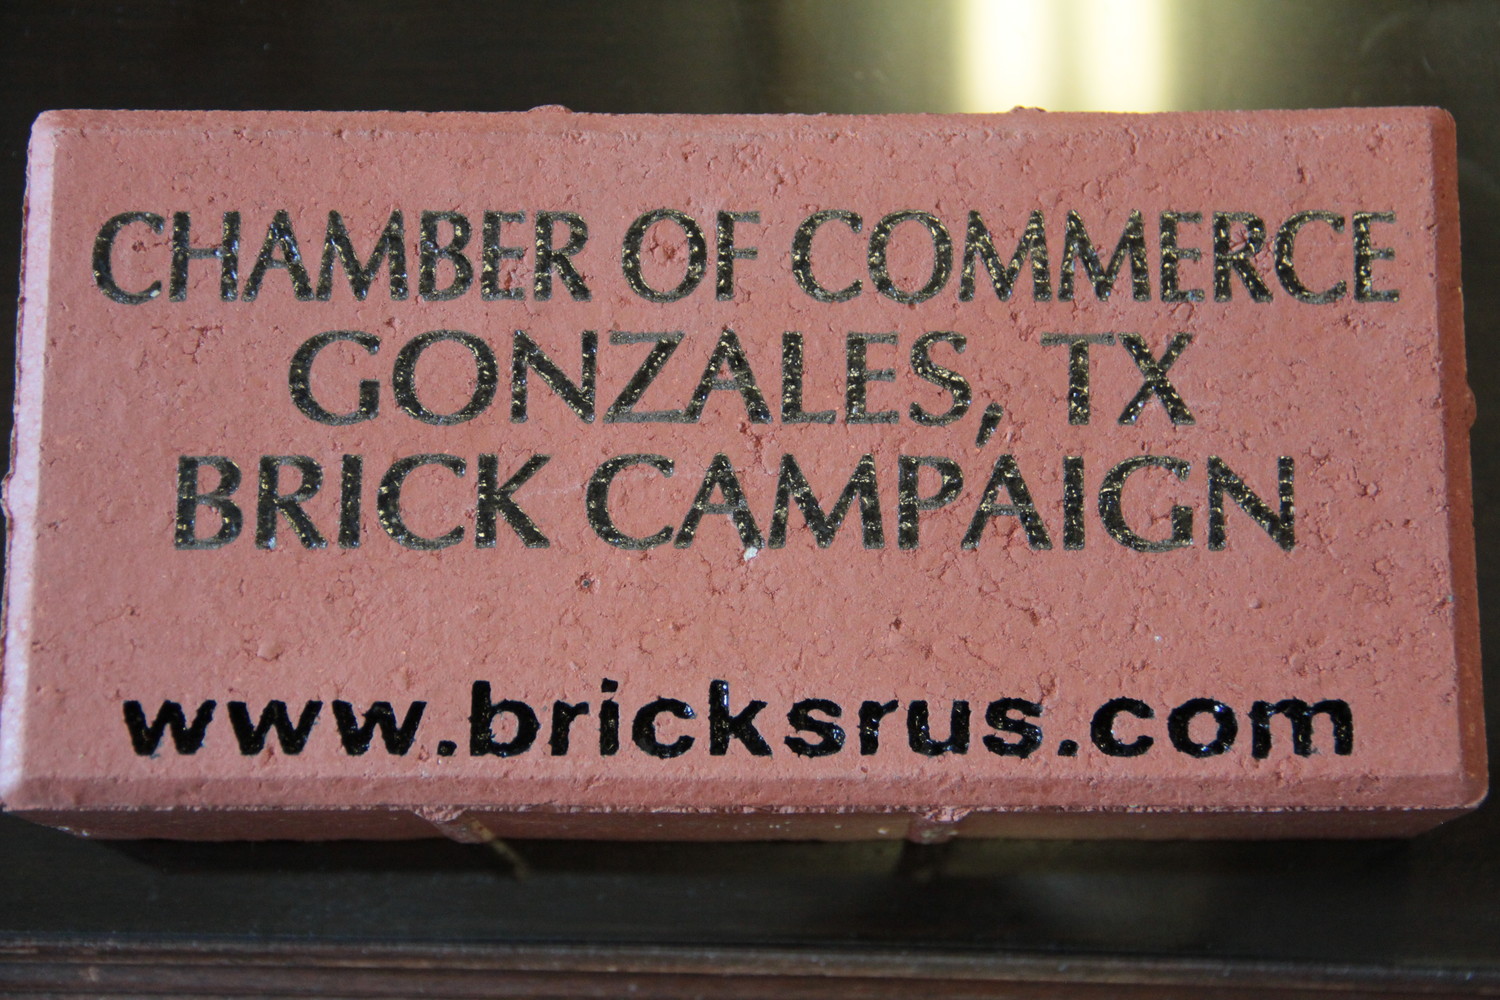 The chamber looks to start a fundraising campaign by selling bricks that will adorn their new sidewalk.